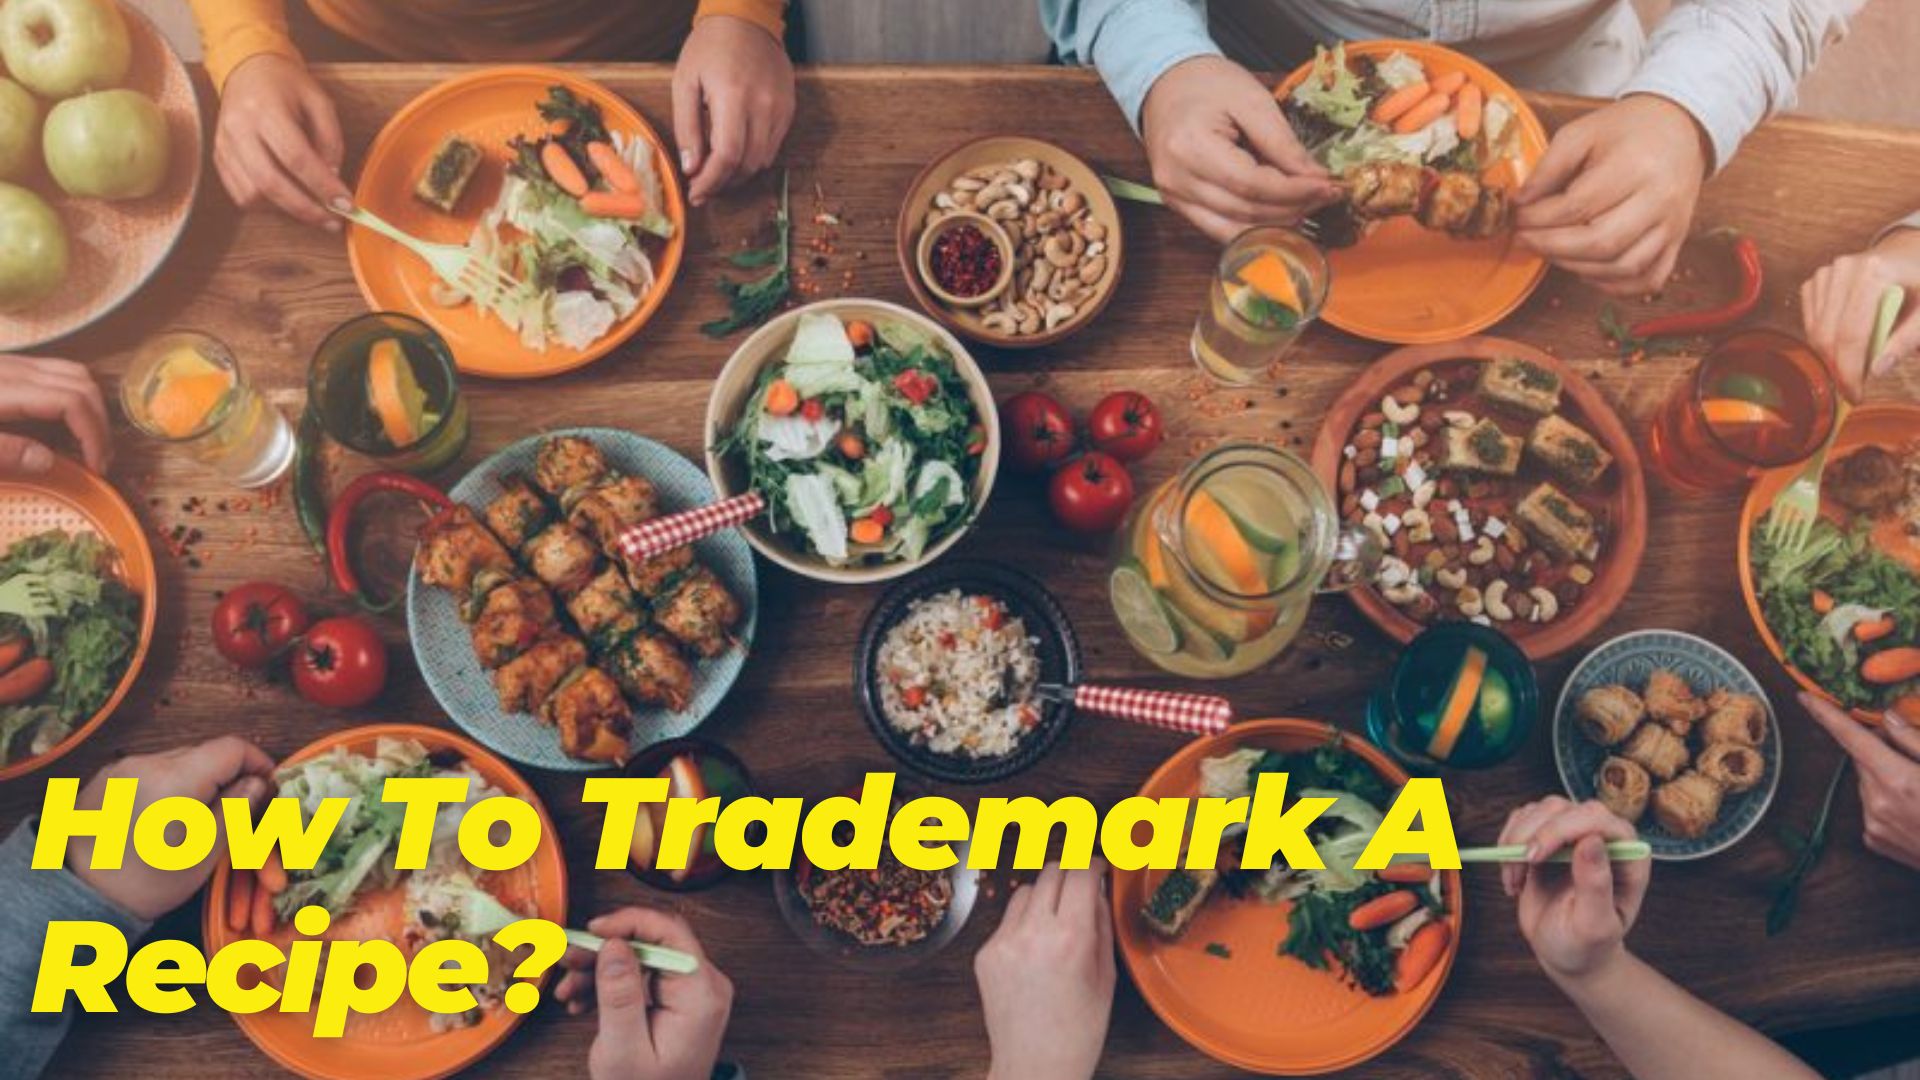 How To Trademark A Recipe